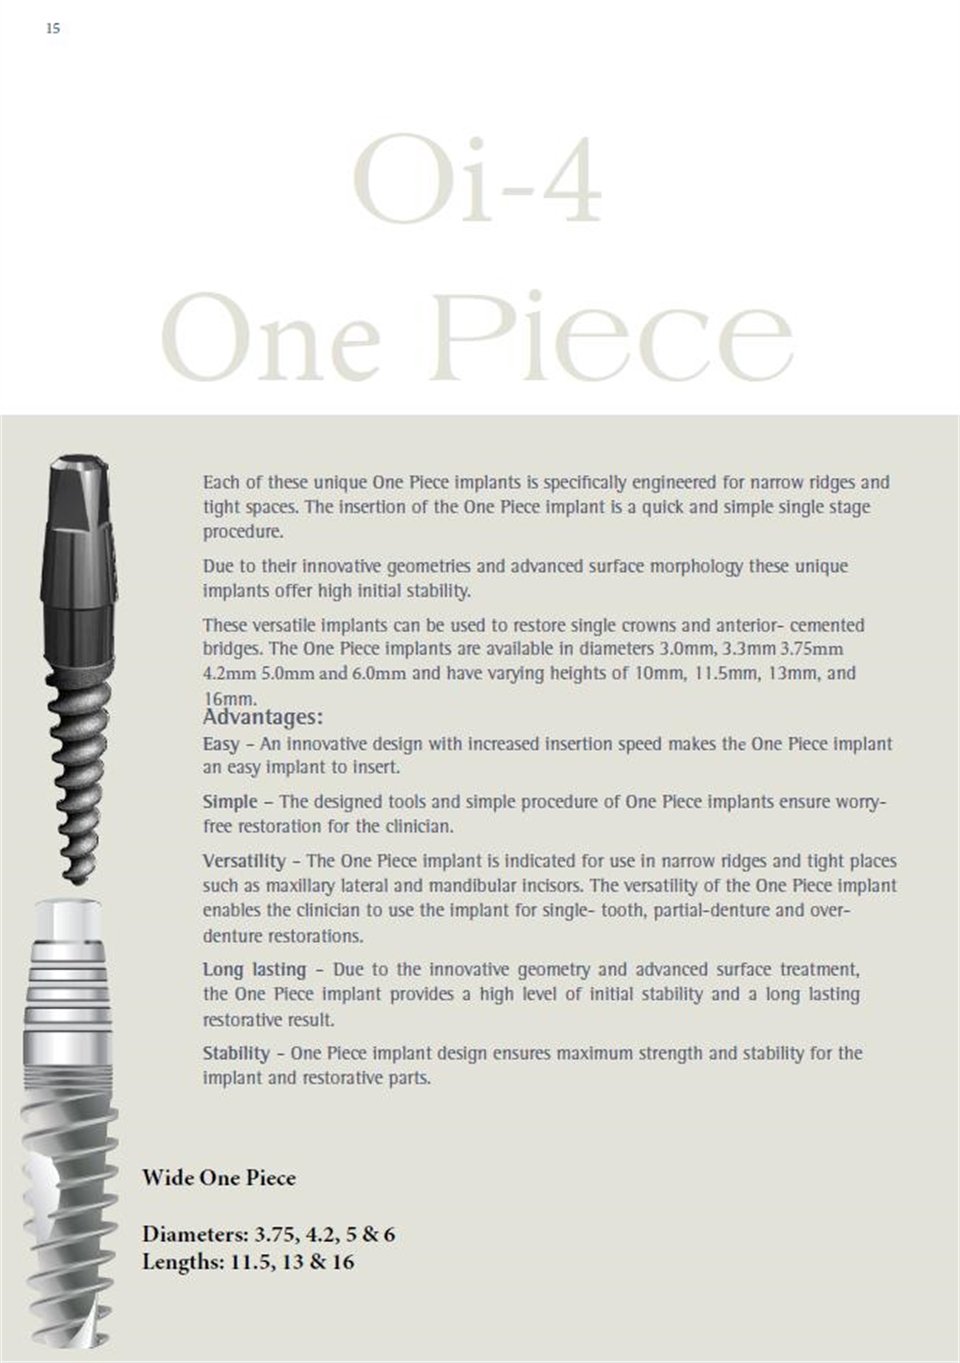 Each of these unique One Piece implants is specifically engineered for narrow ridges and tight spaces.